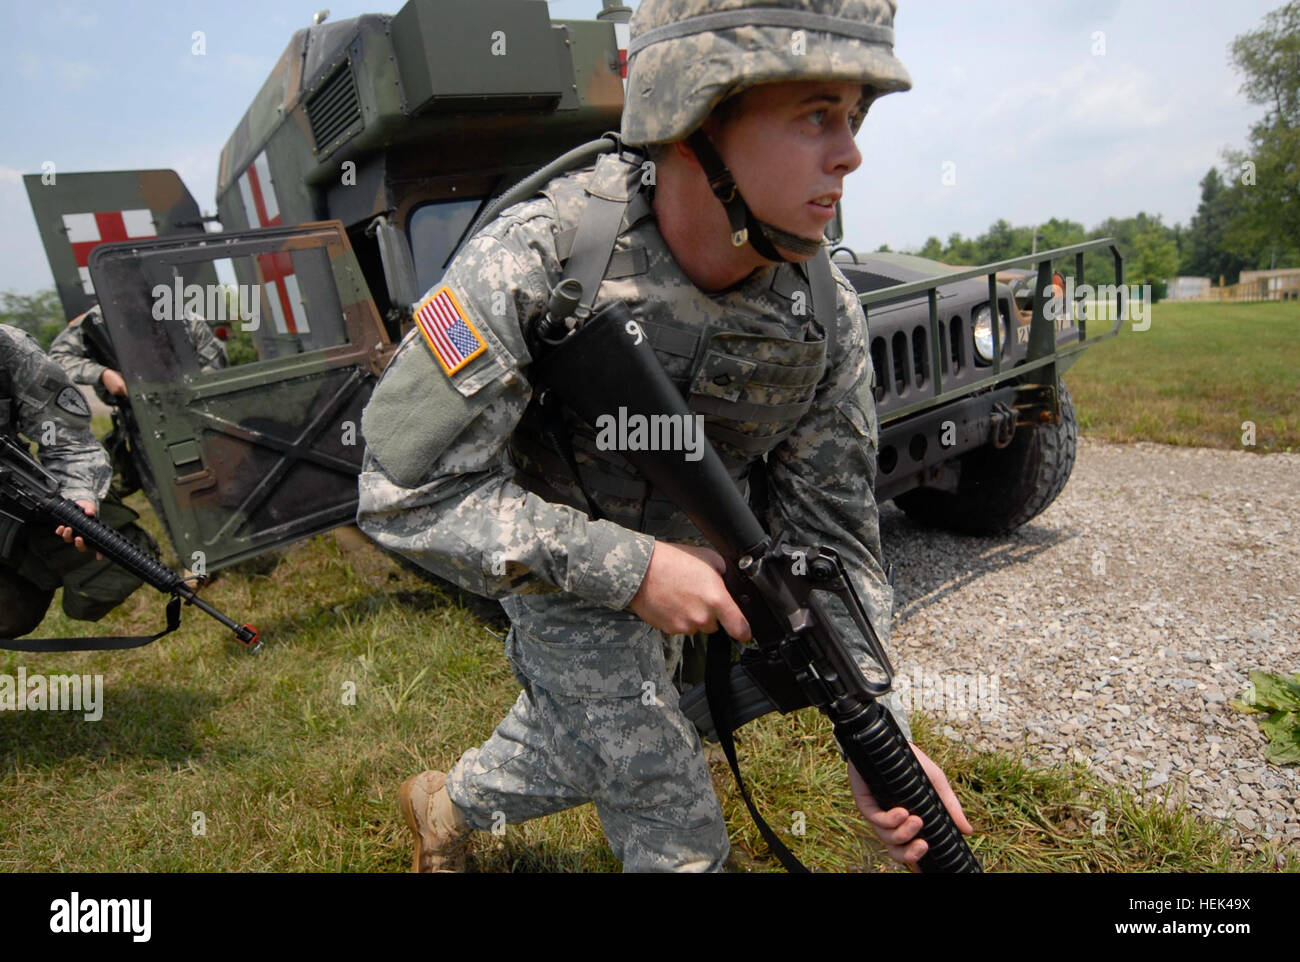 Pfc. Noah Grant, a medic in Ambulance Platoon, 738th Area Medical Support Company headquartered in Lafayette, Ind., sprints from his ambulance after a simulated ambush during a training exercise at the Camp Atterbury Joint Maneuver Training Center in central Indiana, June 23. Grant is part of the 81st Troop Command and was conducting annual training at Camp Atterbury. Combat Medics React to Simulated Ambush, Camp Atterbury 293849 Stock Photo